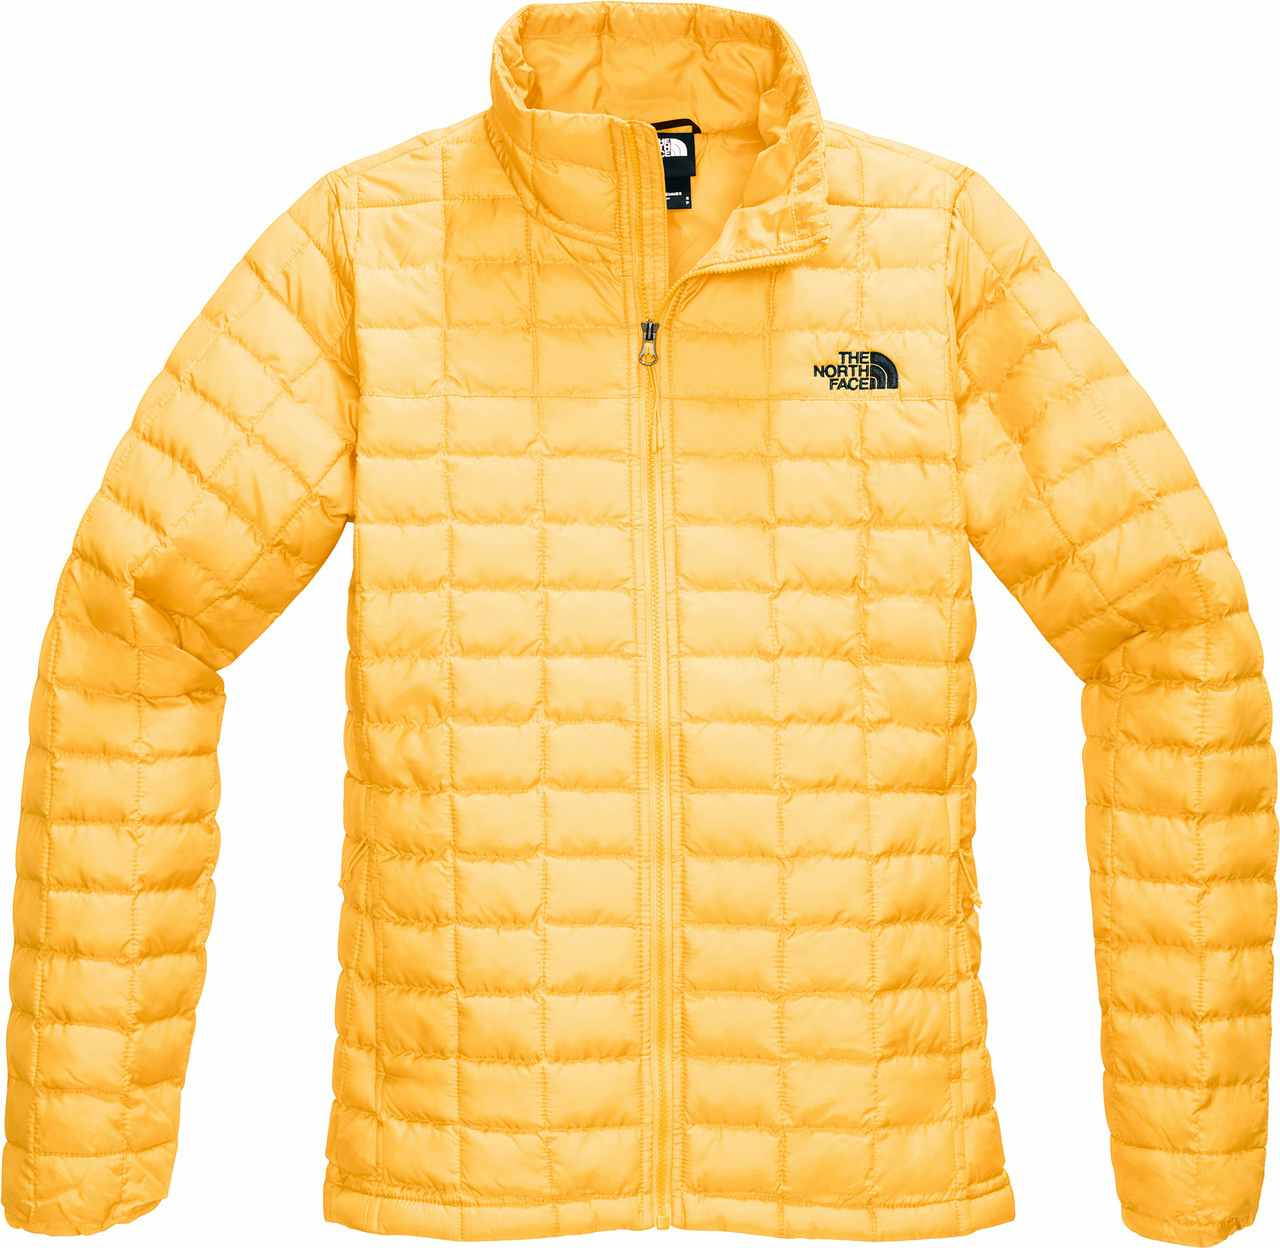 Manteau ThermoBall Eco Jaune TNF mat